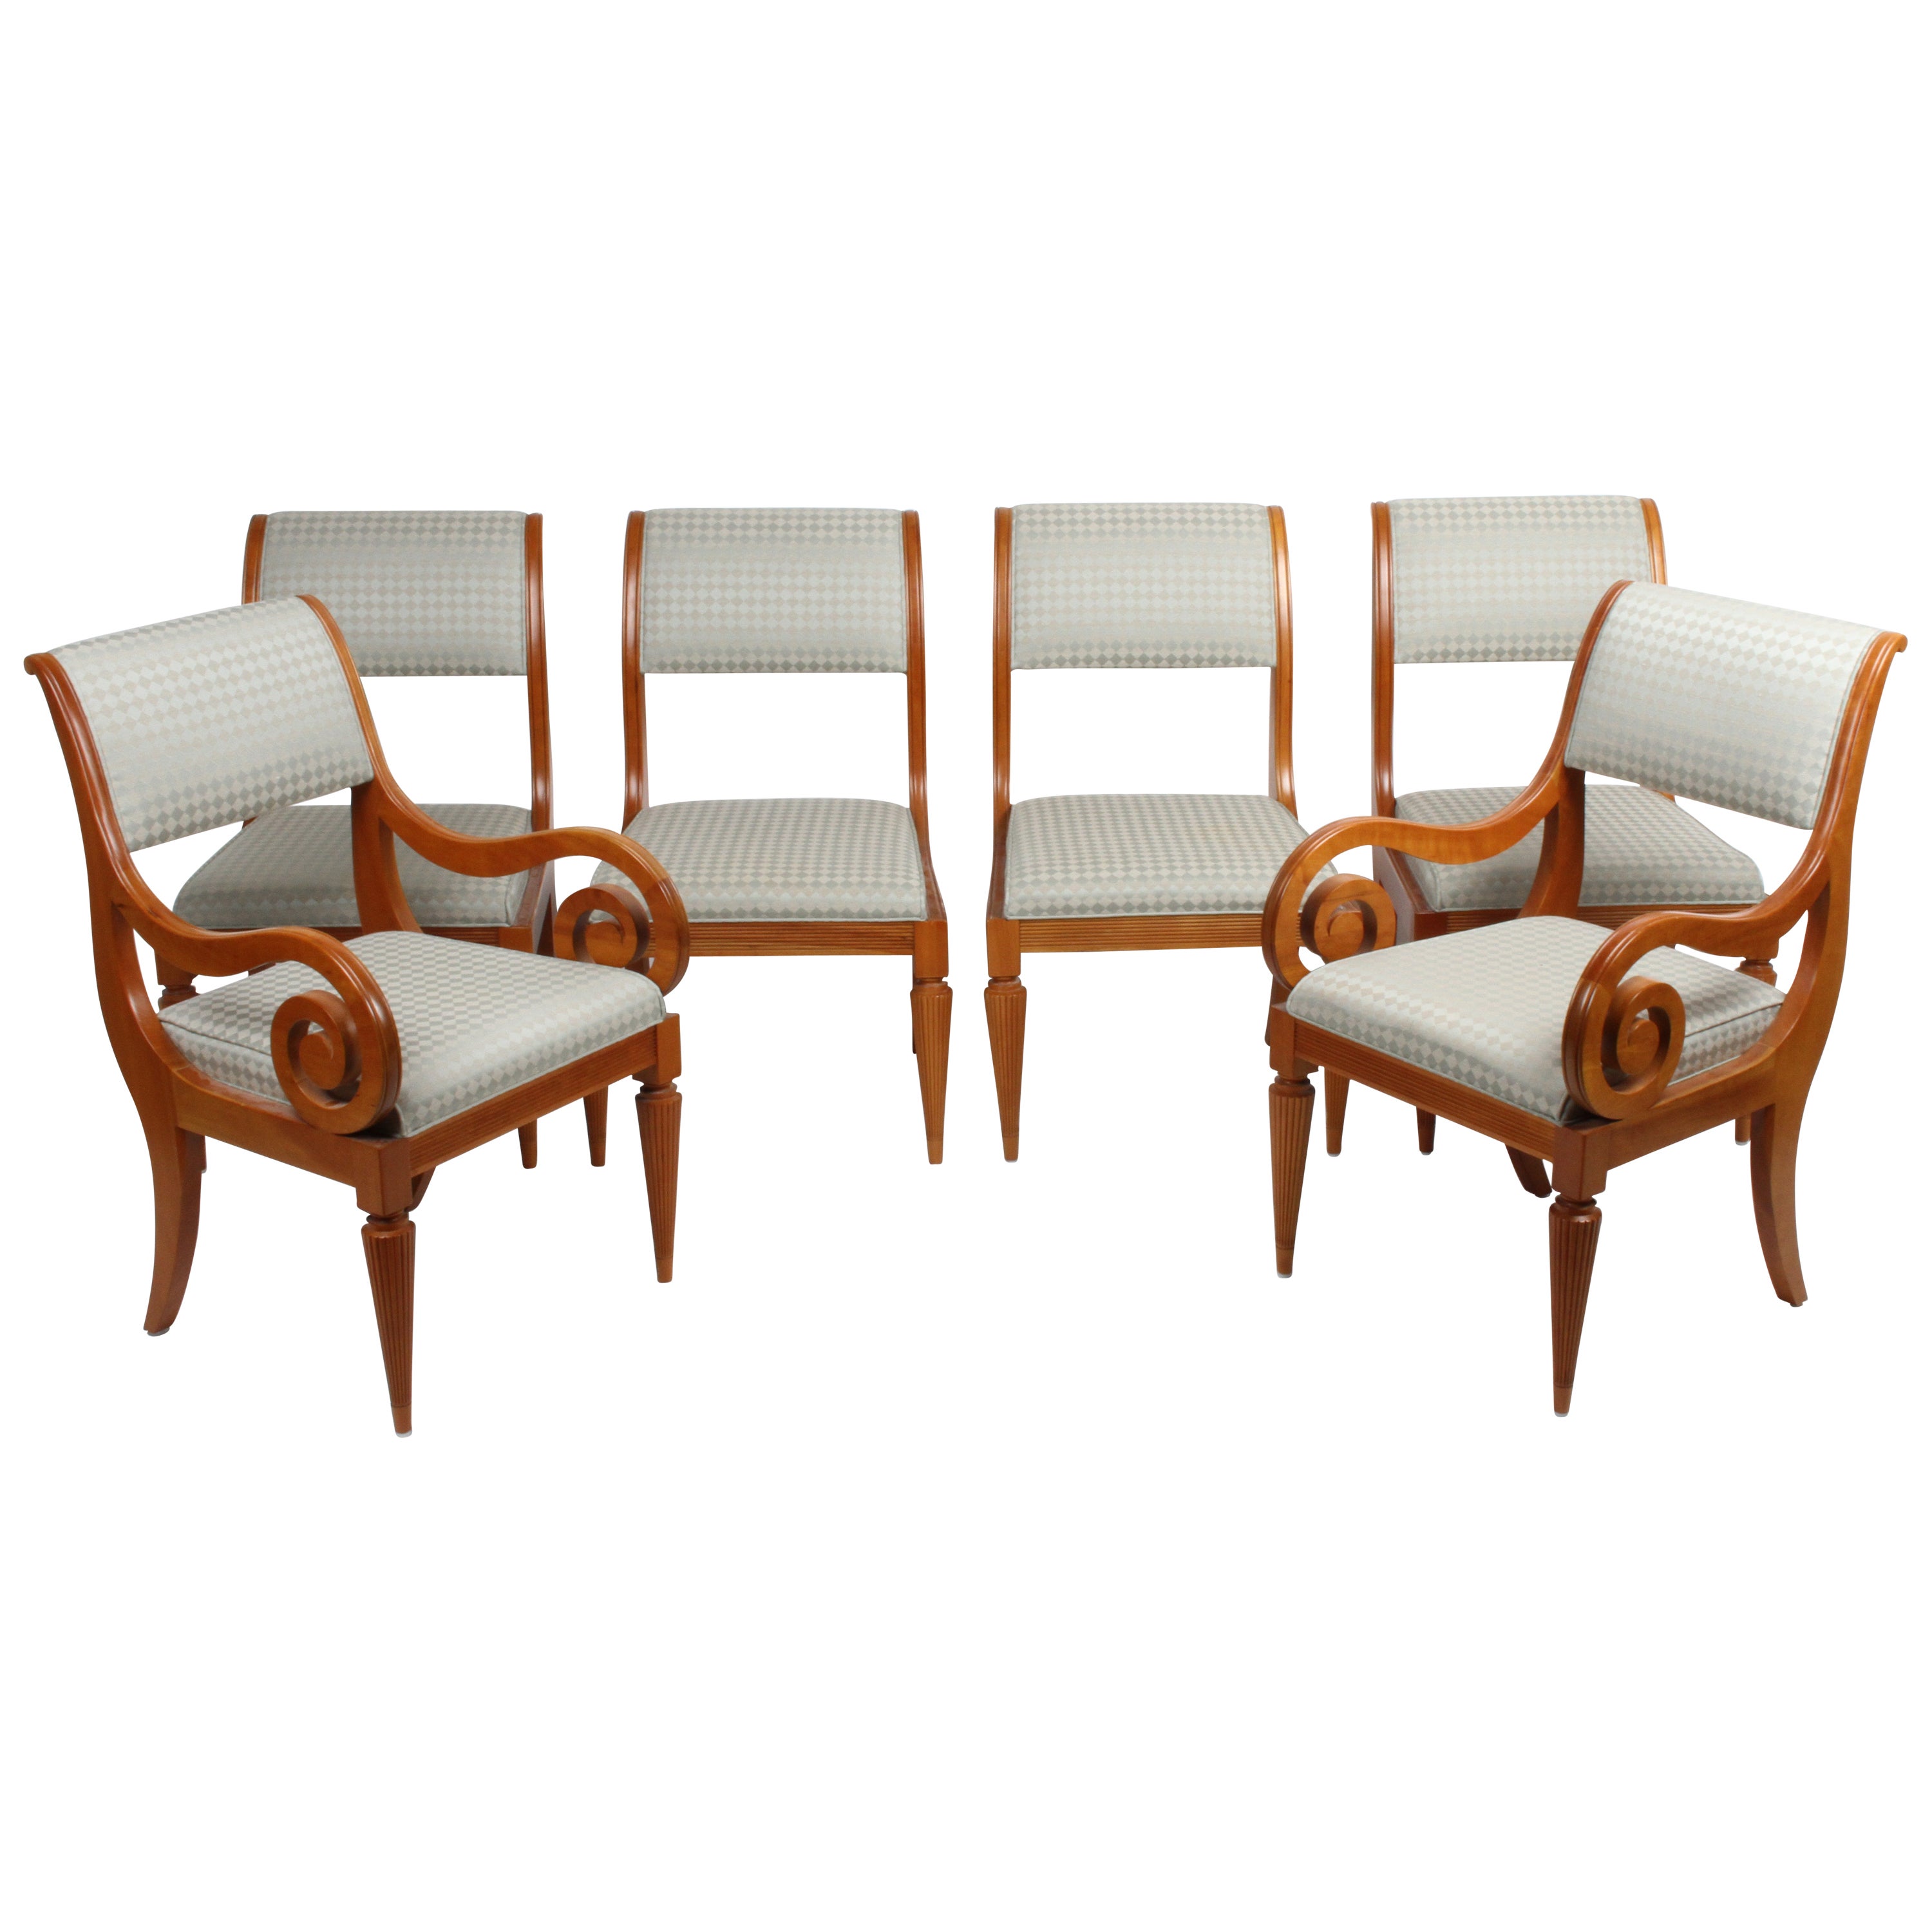 Rare Set of 6 Robert A.M. Stern Bodleian Dining Chairs in Natural Cherry for HBF For Sale